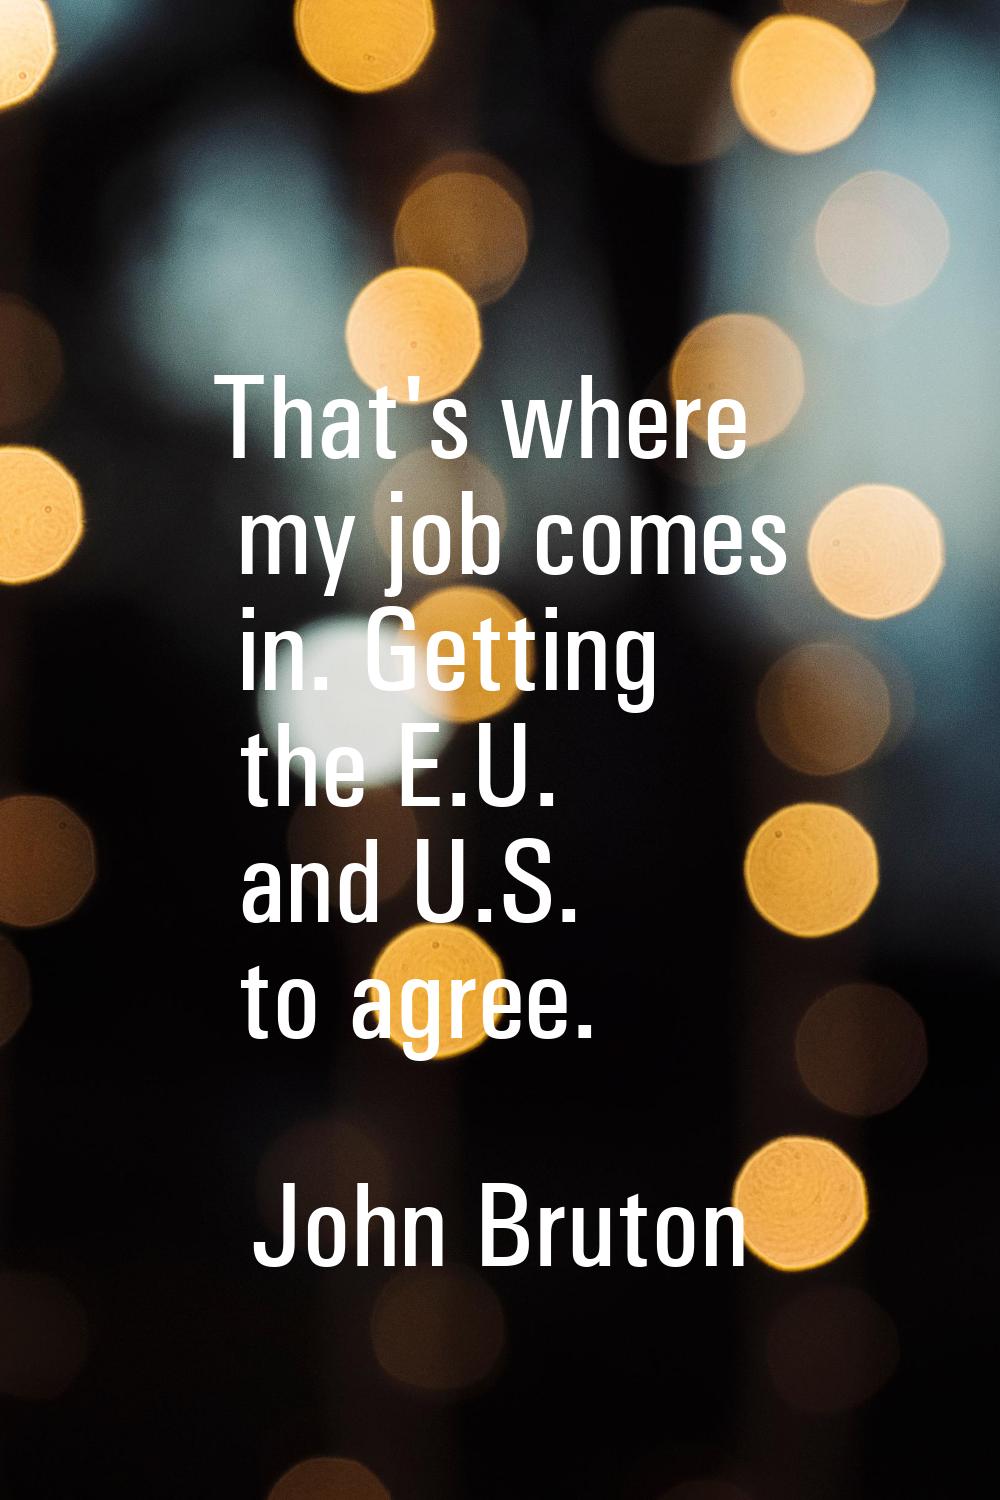 That's where my job comes in. Getting the E.U. and U.S. to agree.